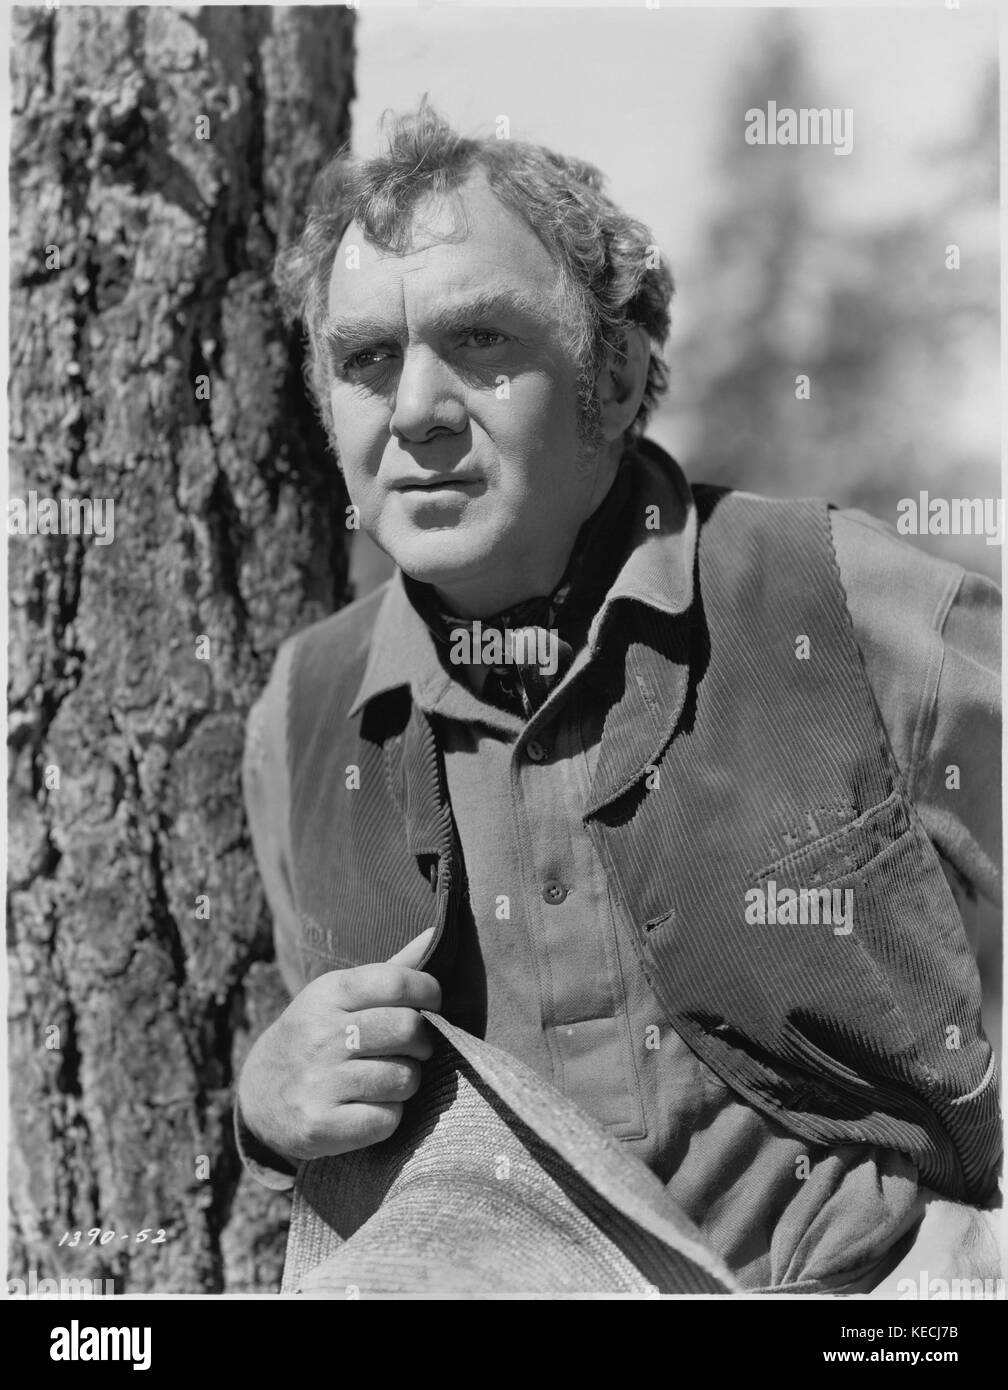 VINTAGE Thomas Mitchell CHARACTER ACTOR '37 LOST HORIZON Portrait by  VALENTE